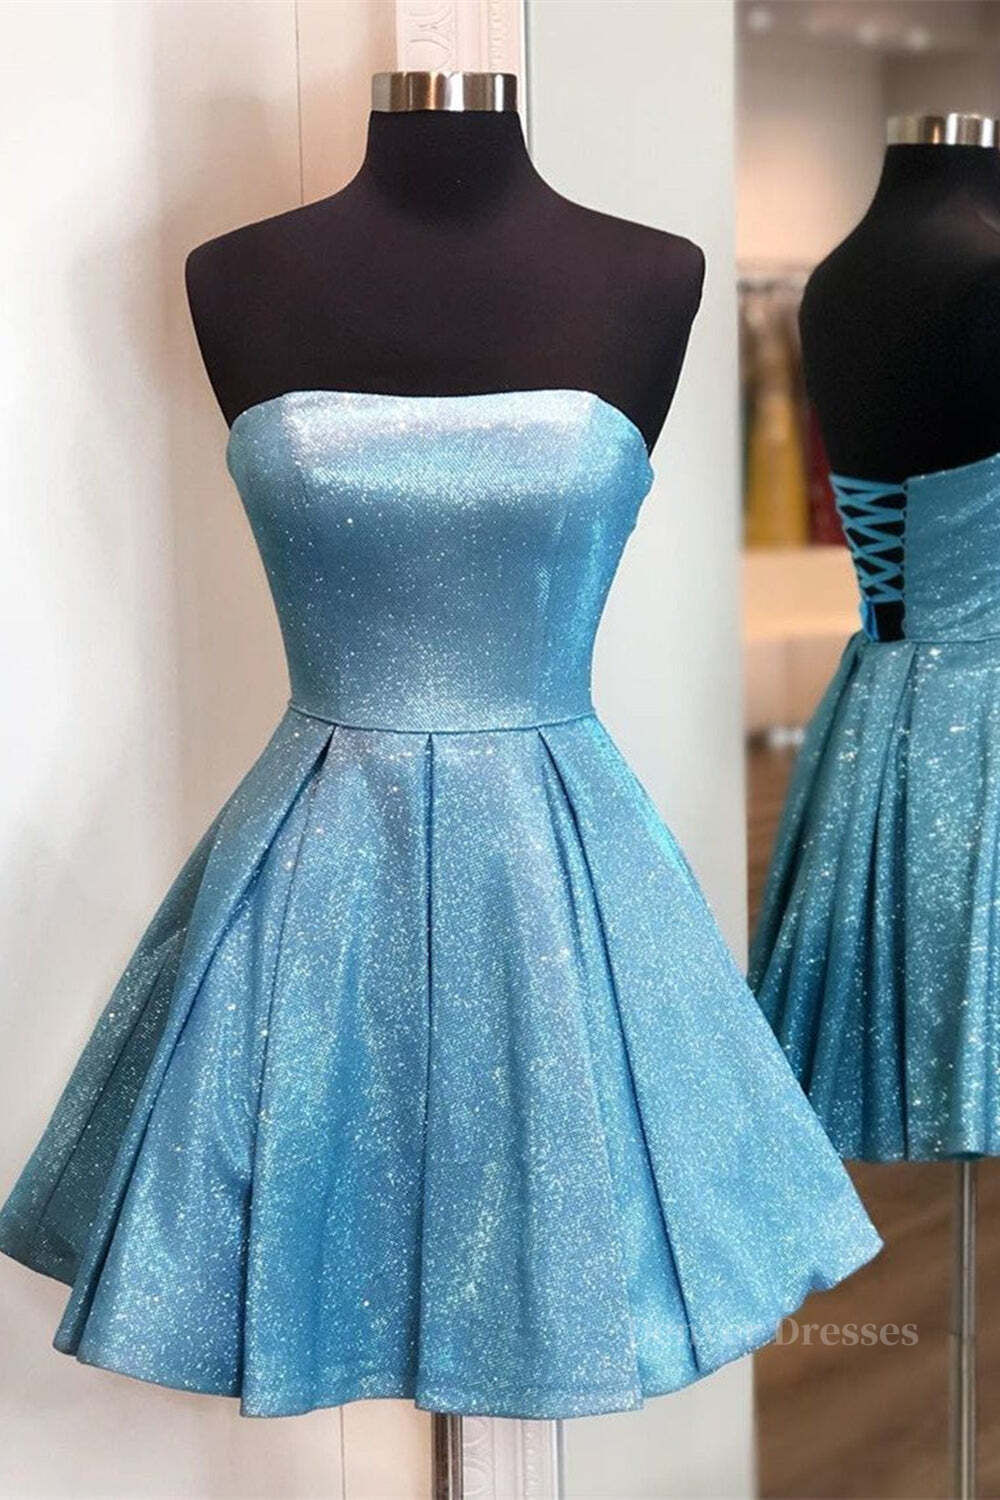 Prom Dress Gowns, Shiny Strapless Blue Short Prom Dresses, Open Back Blue Homecoming Dresses, Blue Formal Evening Dresses